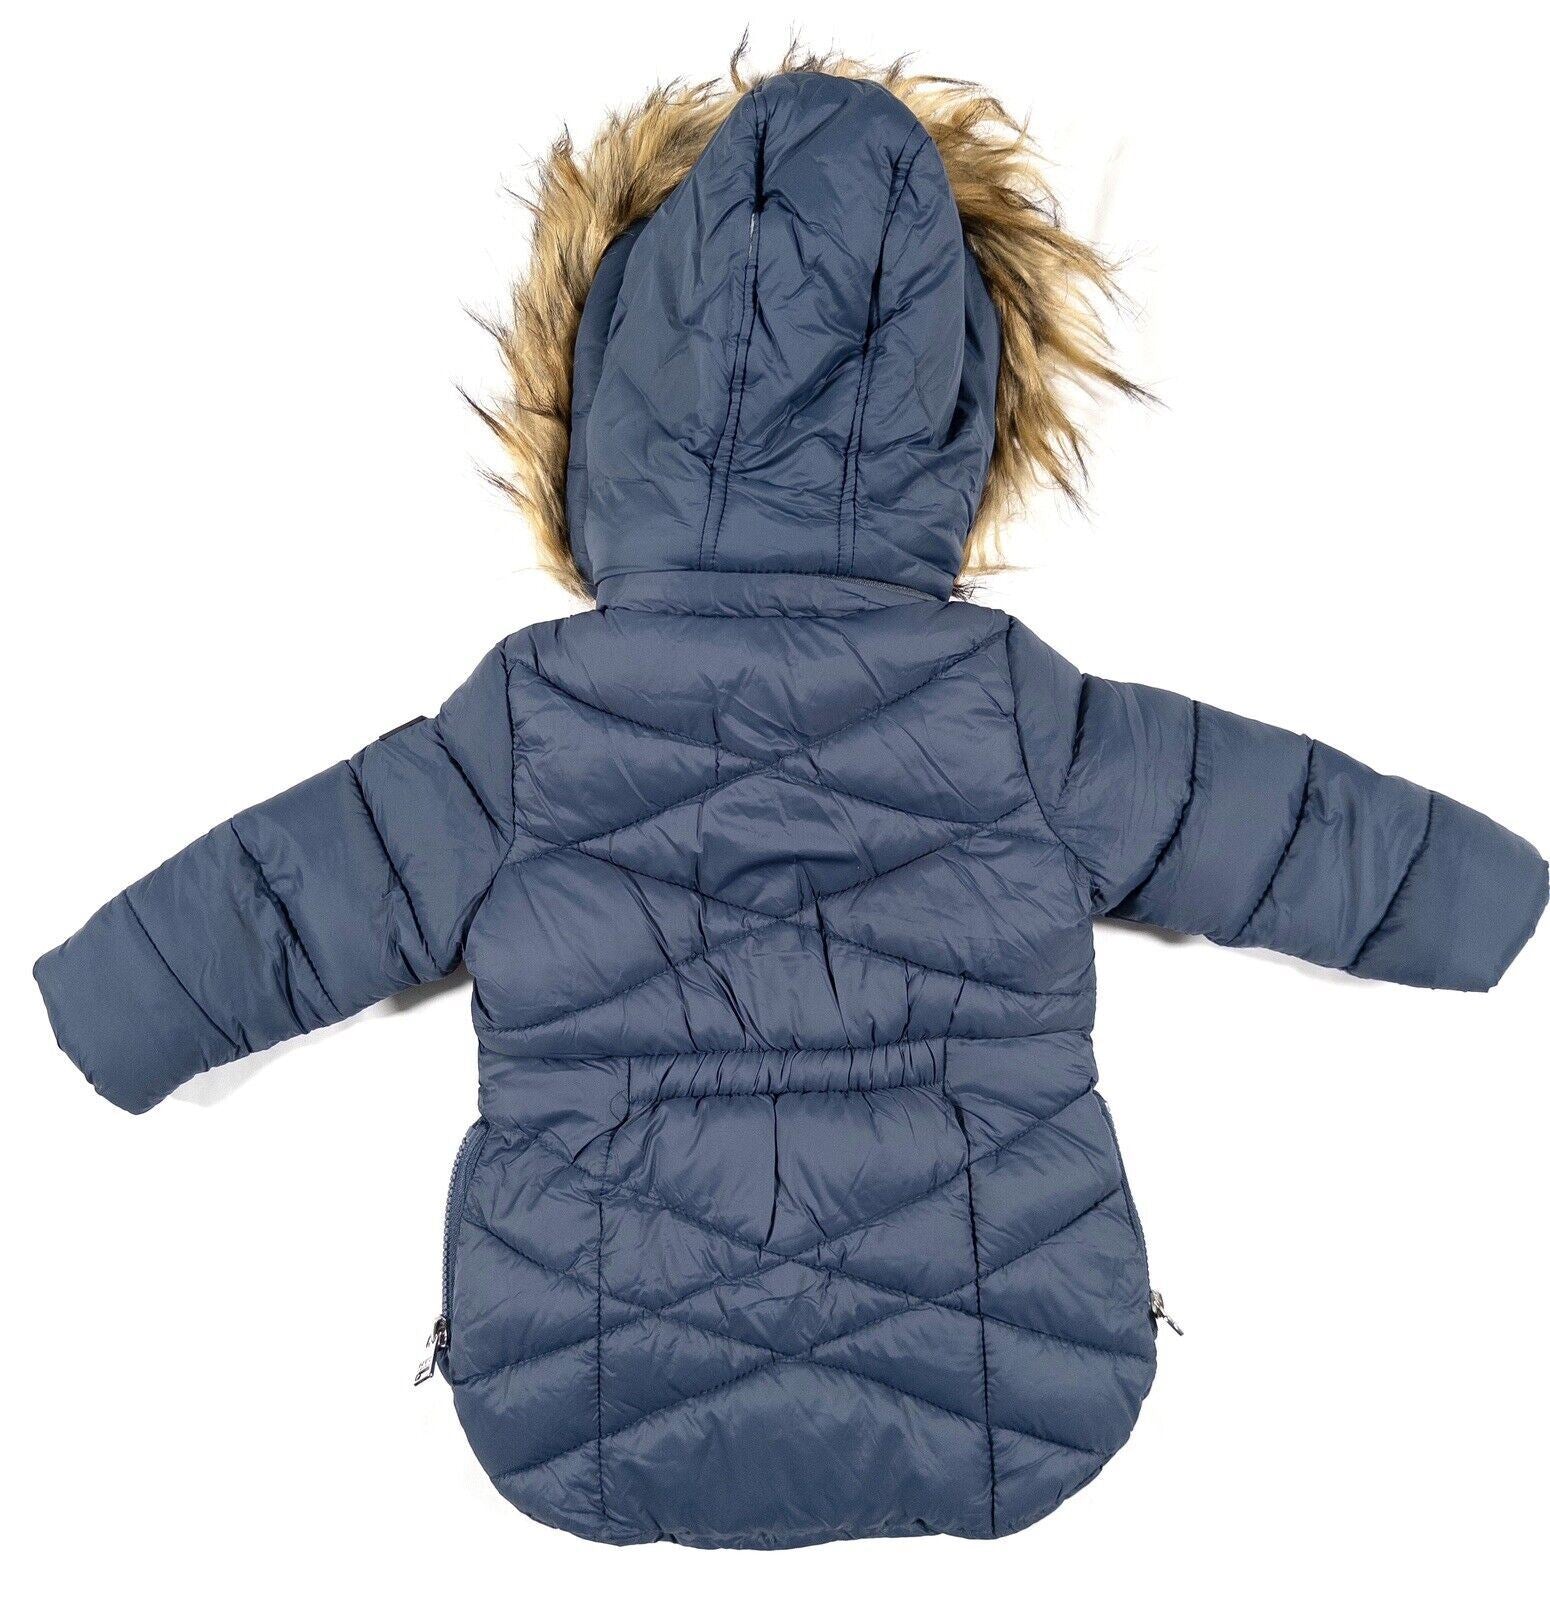 DKNY JEANS Baby Girls Blue Puffer Coat Size UK 12 Months